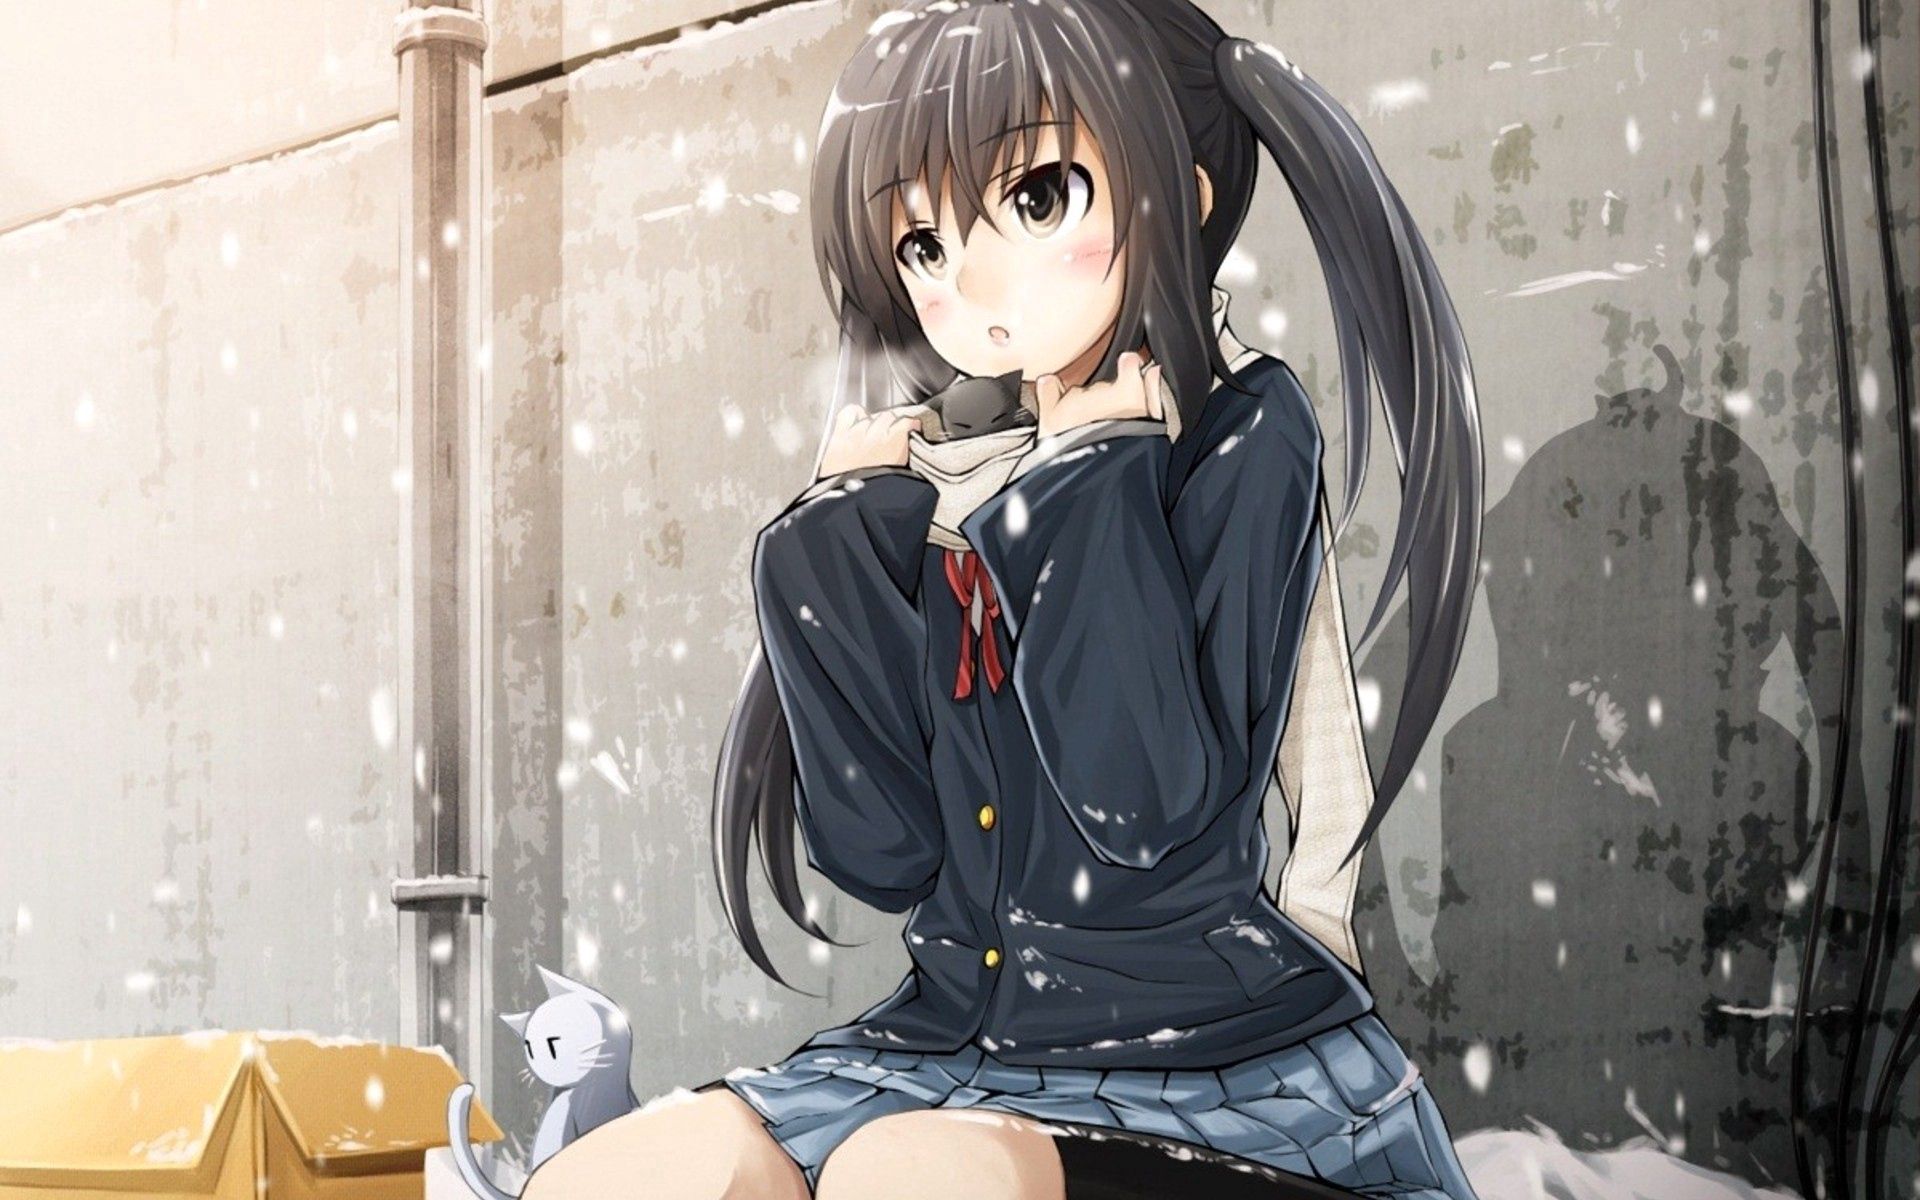 114642 download wallpaper sadness, anime, girl, stroll, brunette screensavers and pictures for free